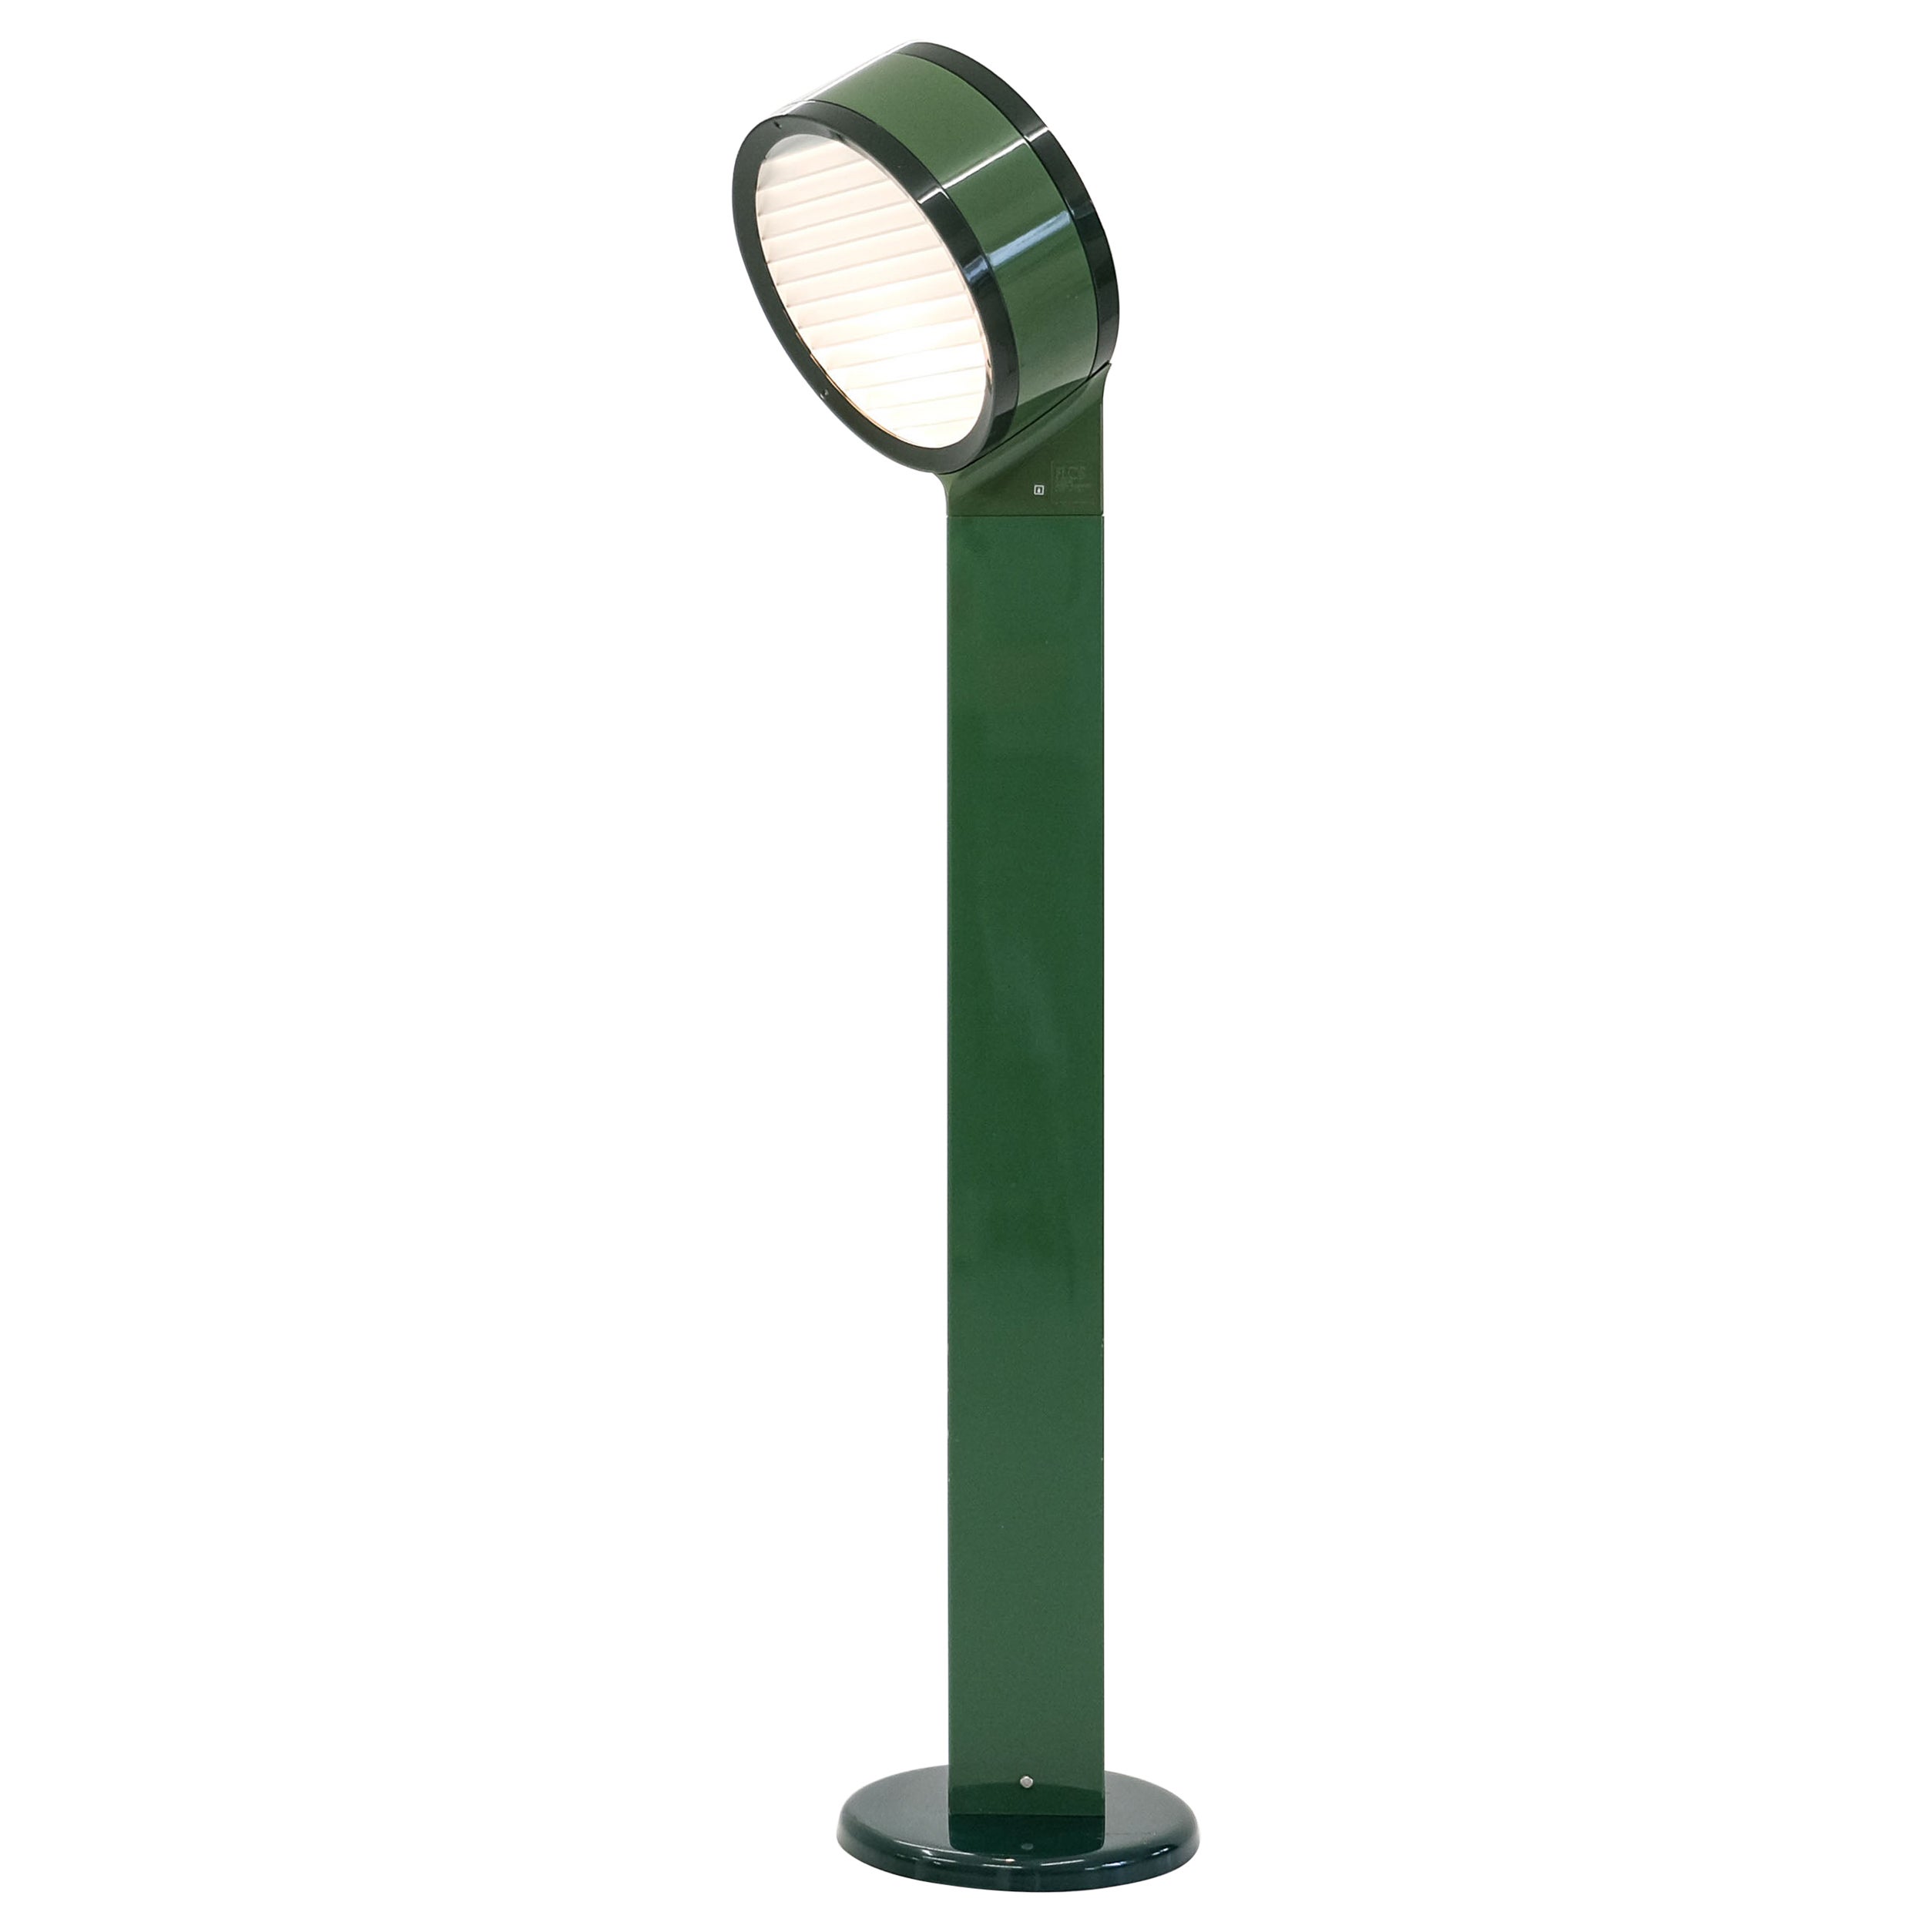 Tamburo Floor Lamp by Afra & Tobia Scarpa for Flos for Inside and Outside Use